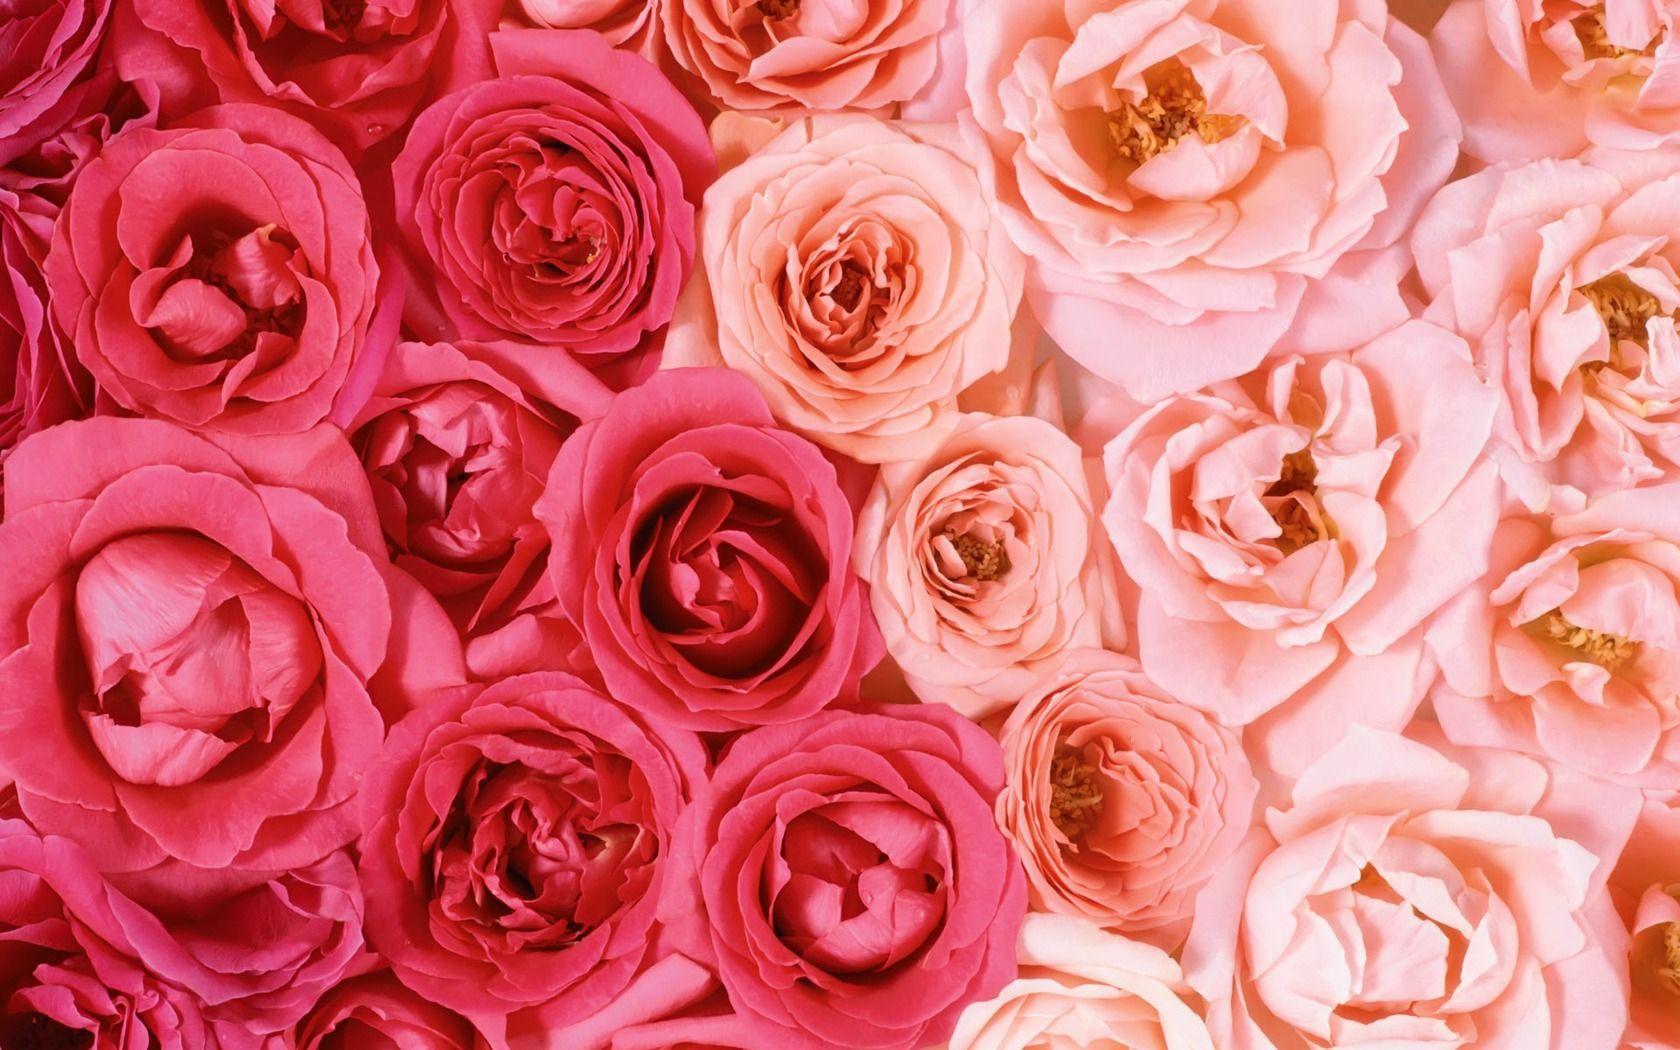 Aesthetic Rose Computer Wallpapers - Top Free Aesthetic ...